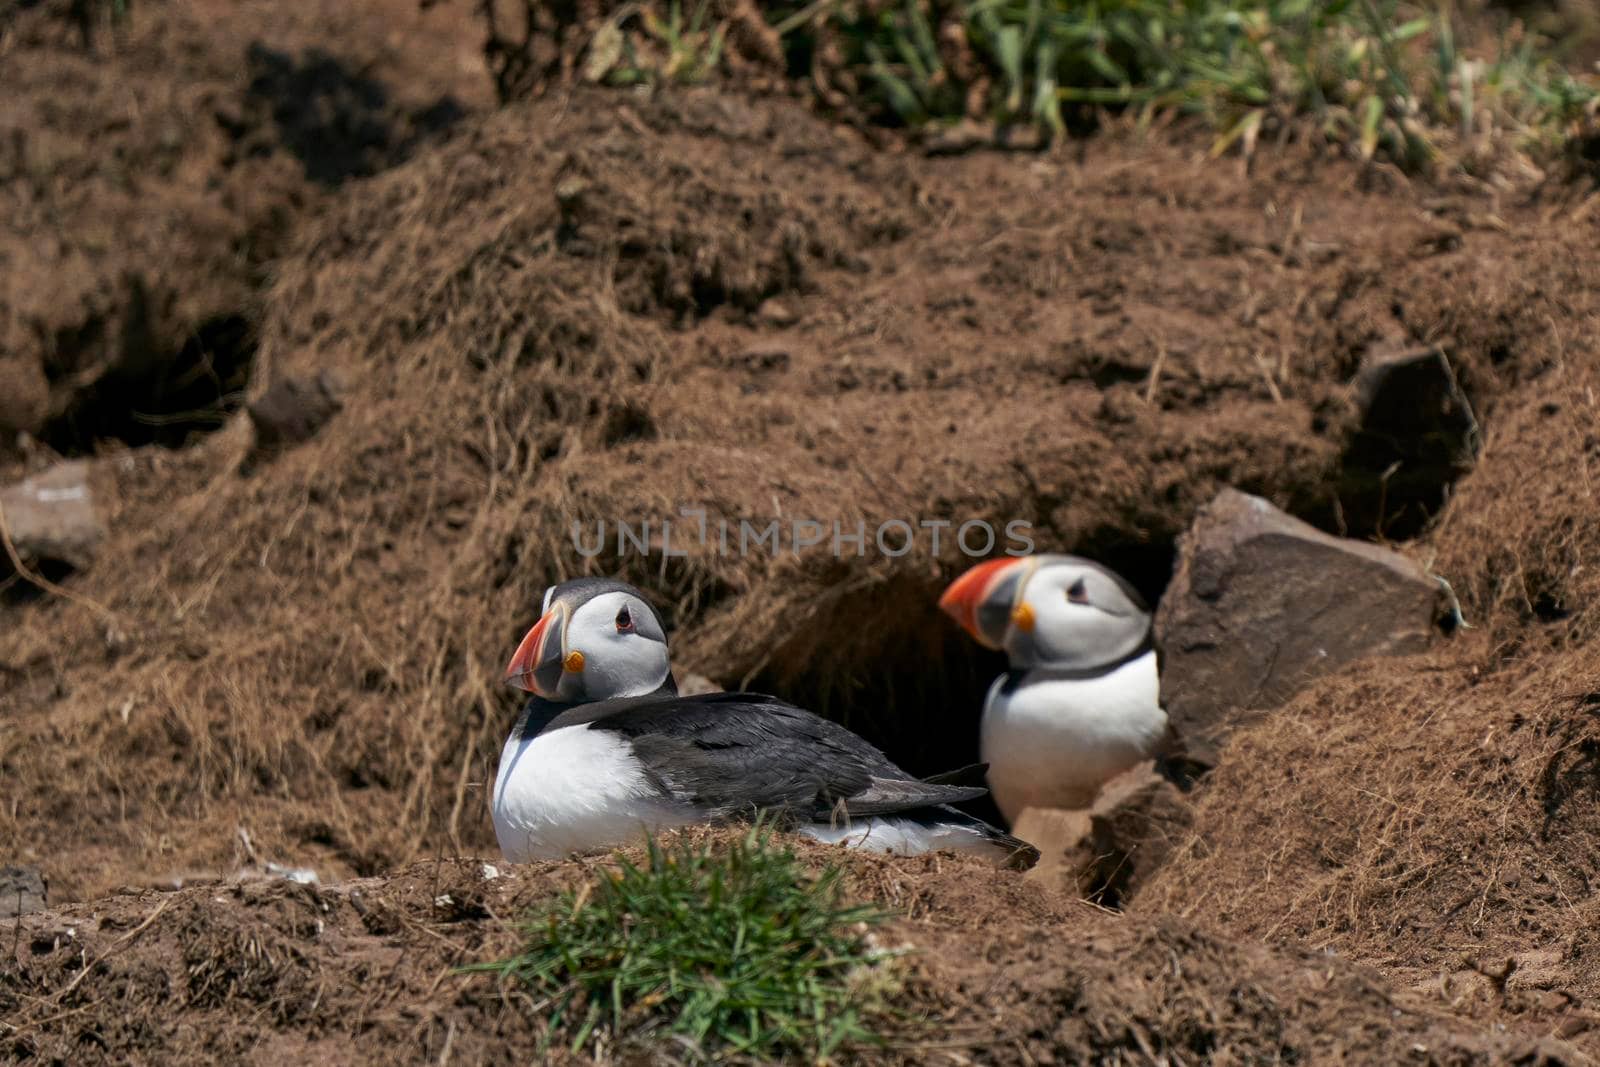 Puffin at nesting burrow by JeremyRichards